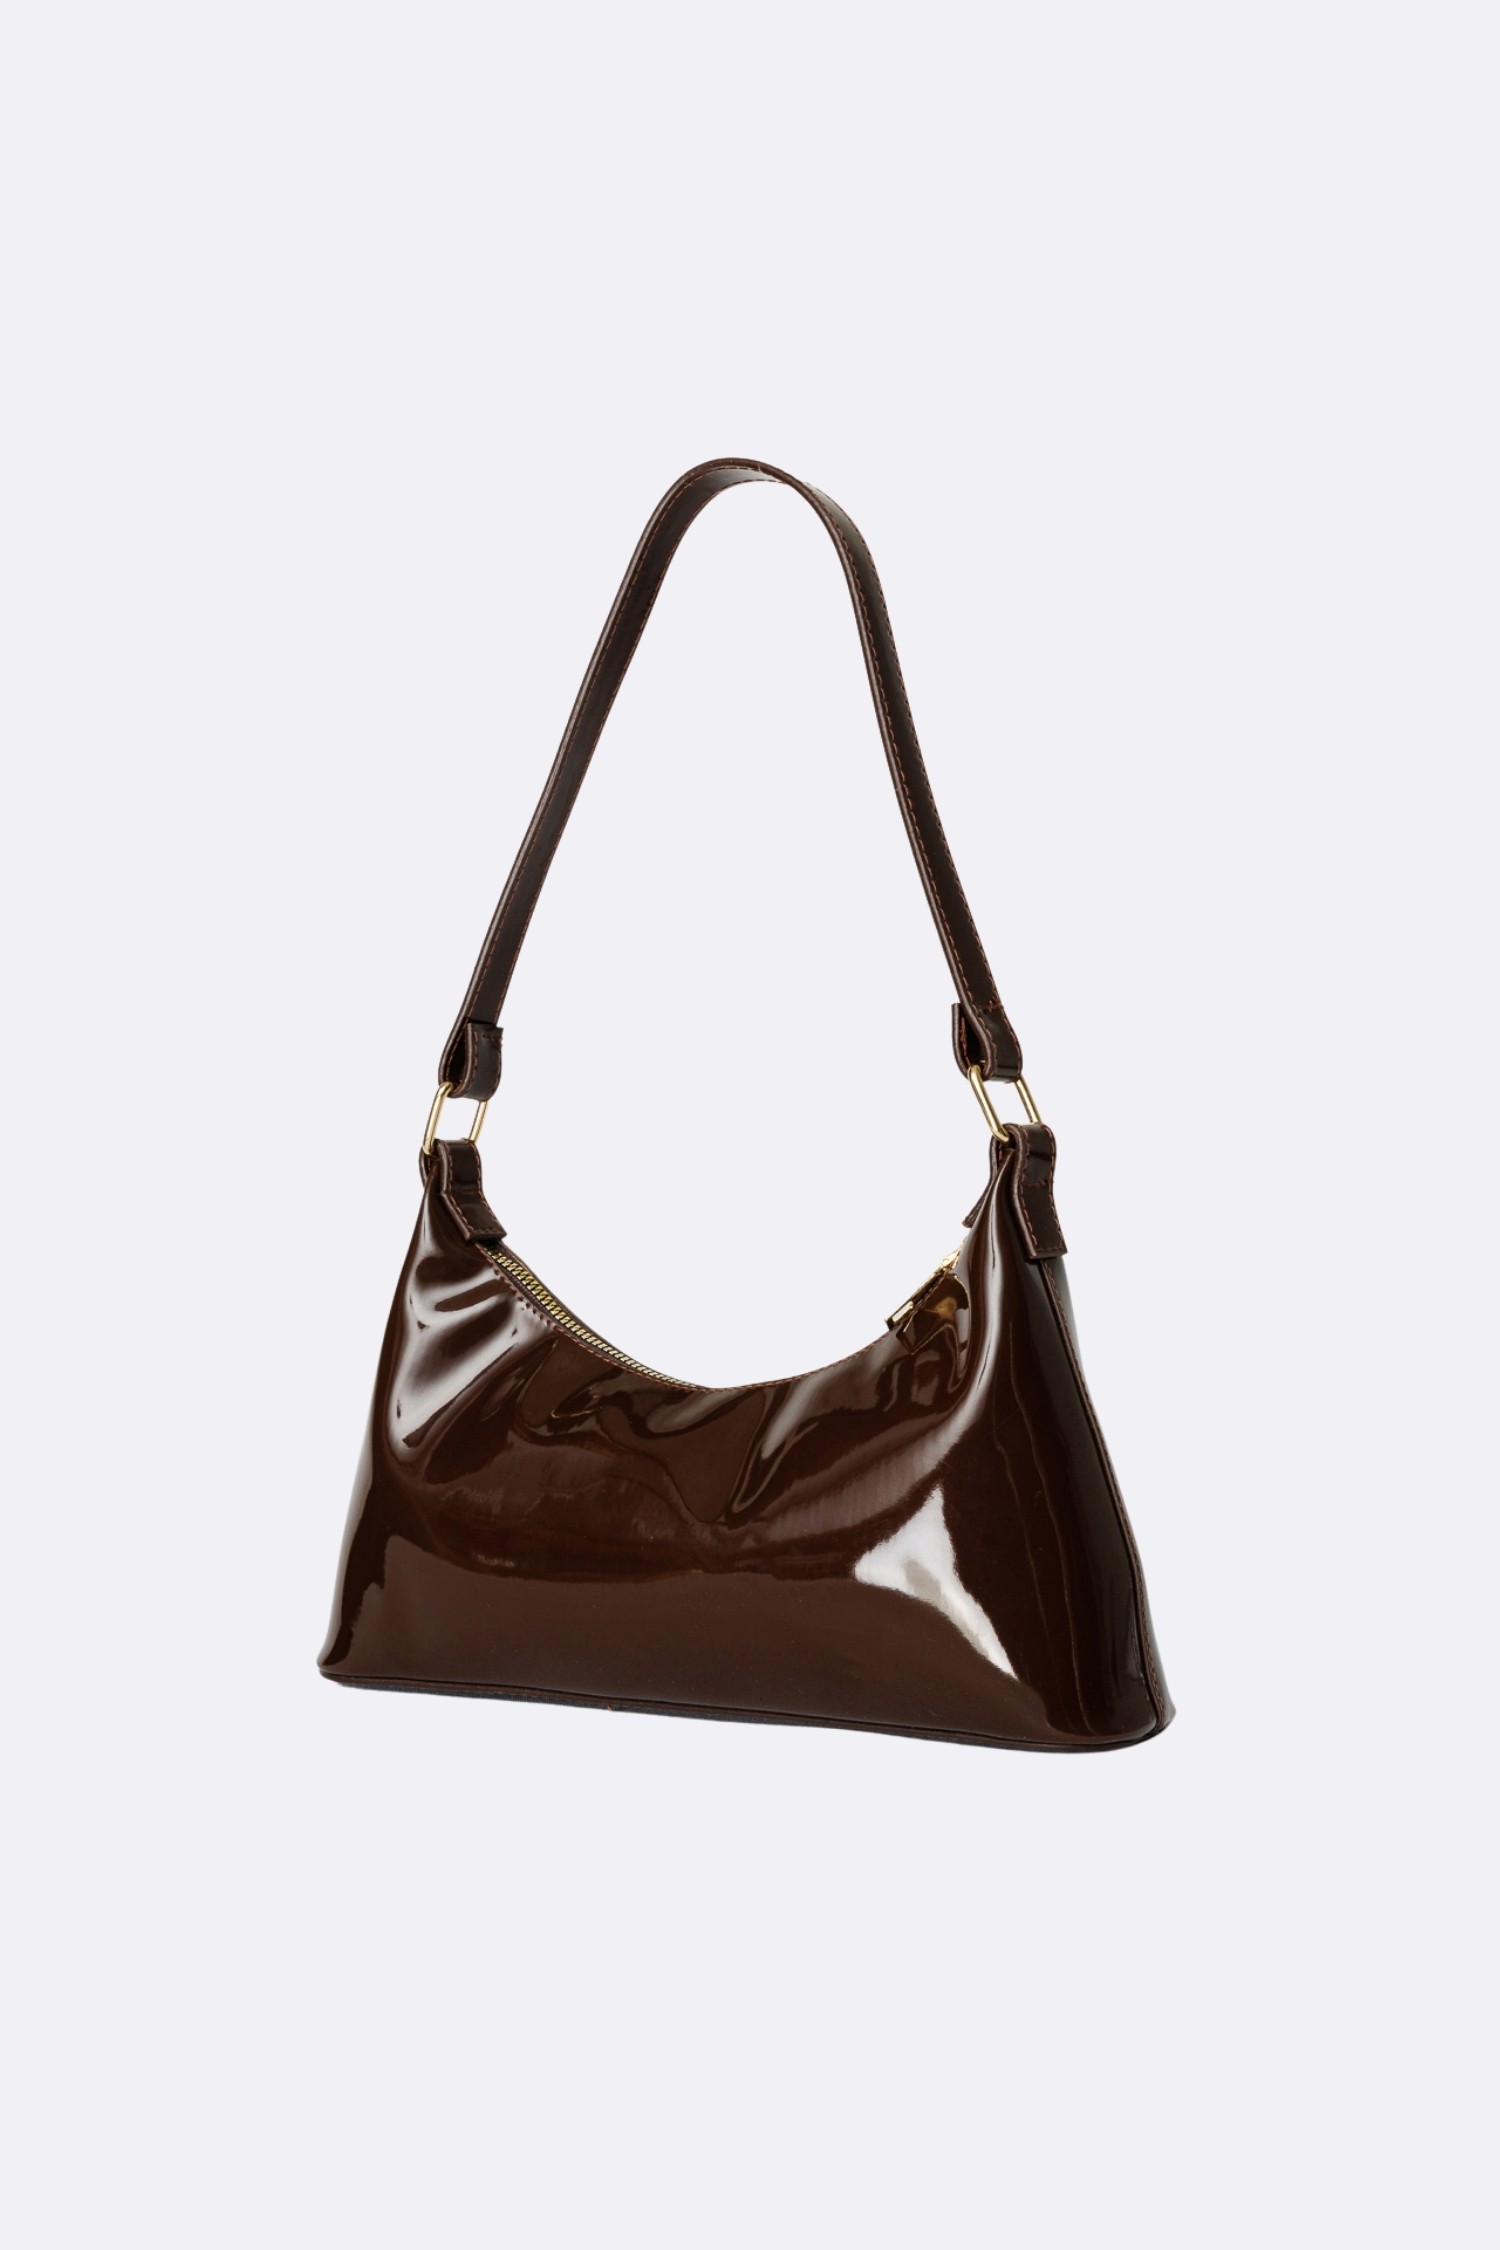 Garden Patent Leather Bag - Bitter Coffee